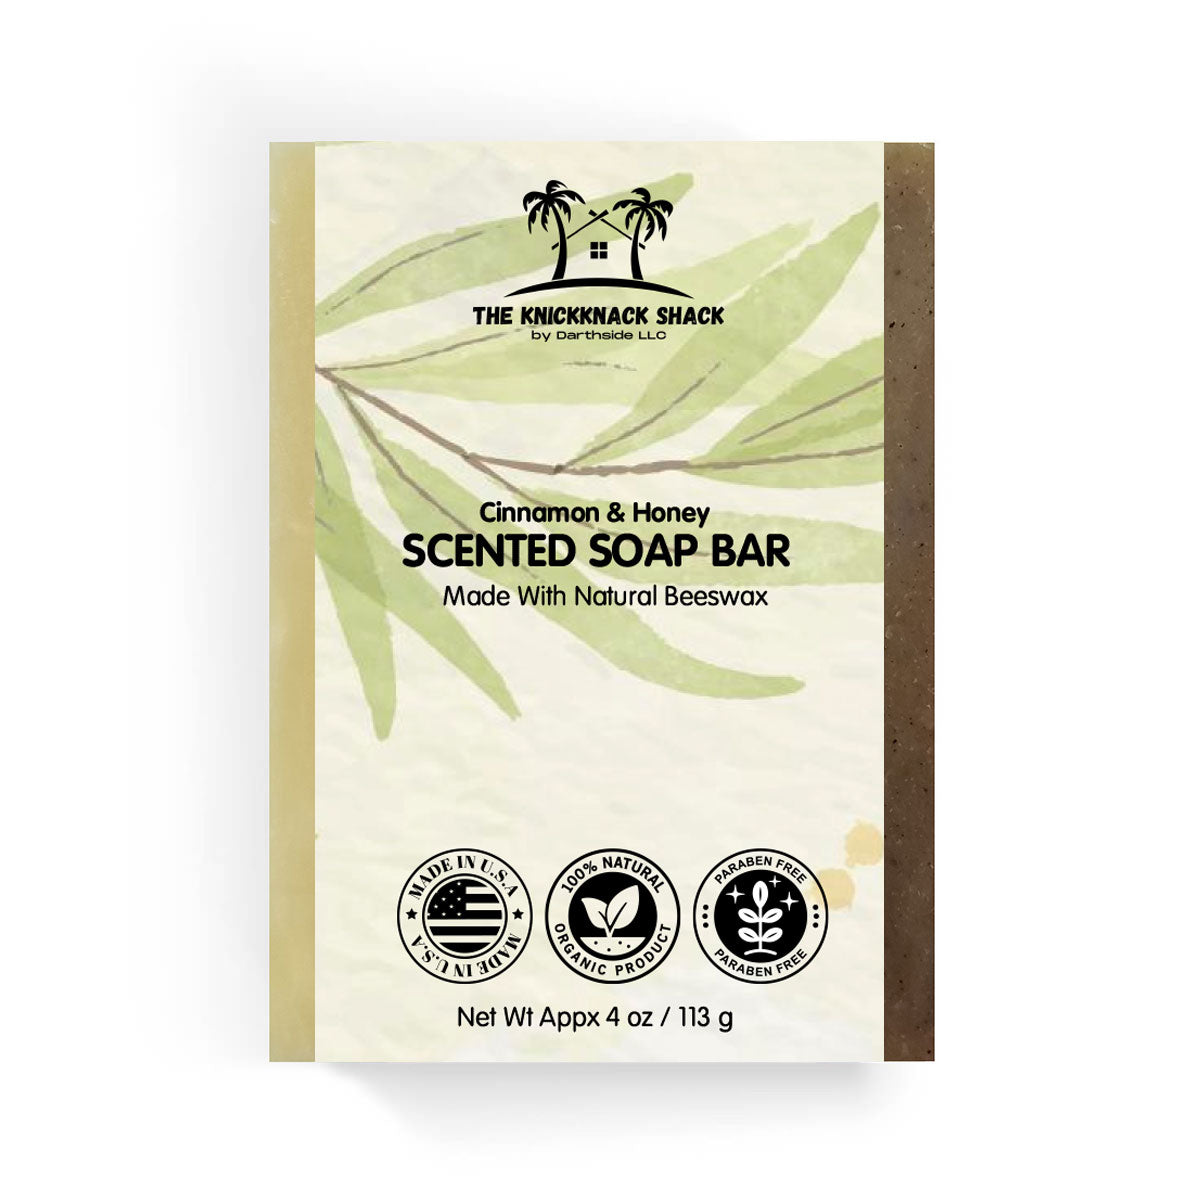 Cinnamon & Honey Scented Soap Bar with Natural Beeswax